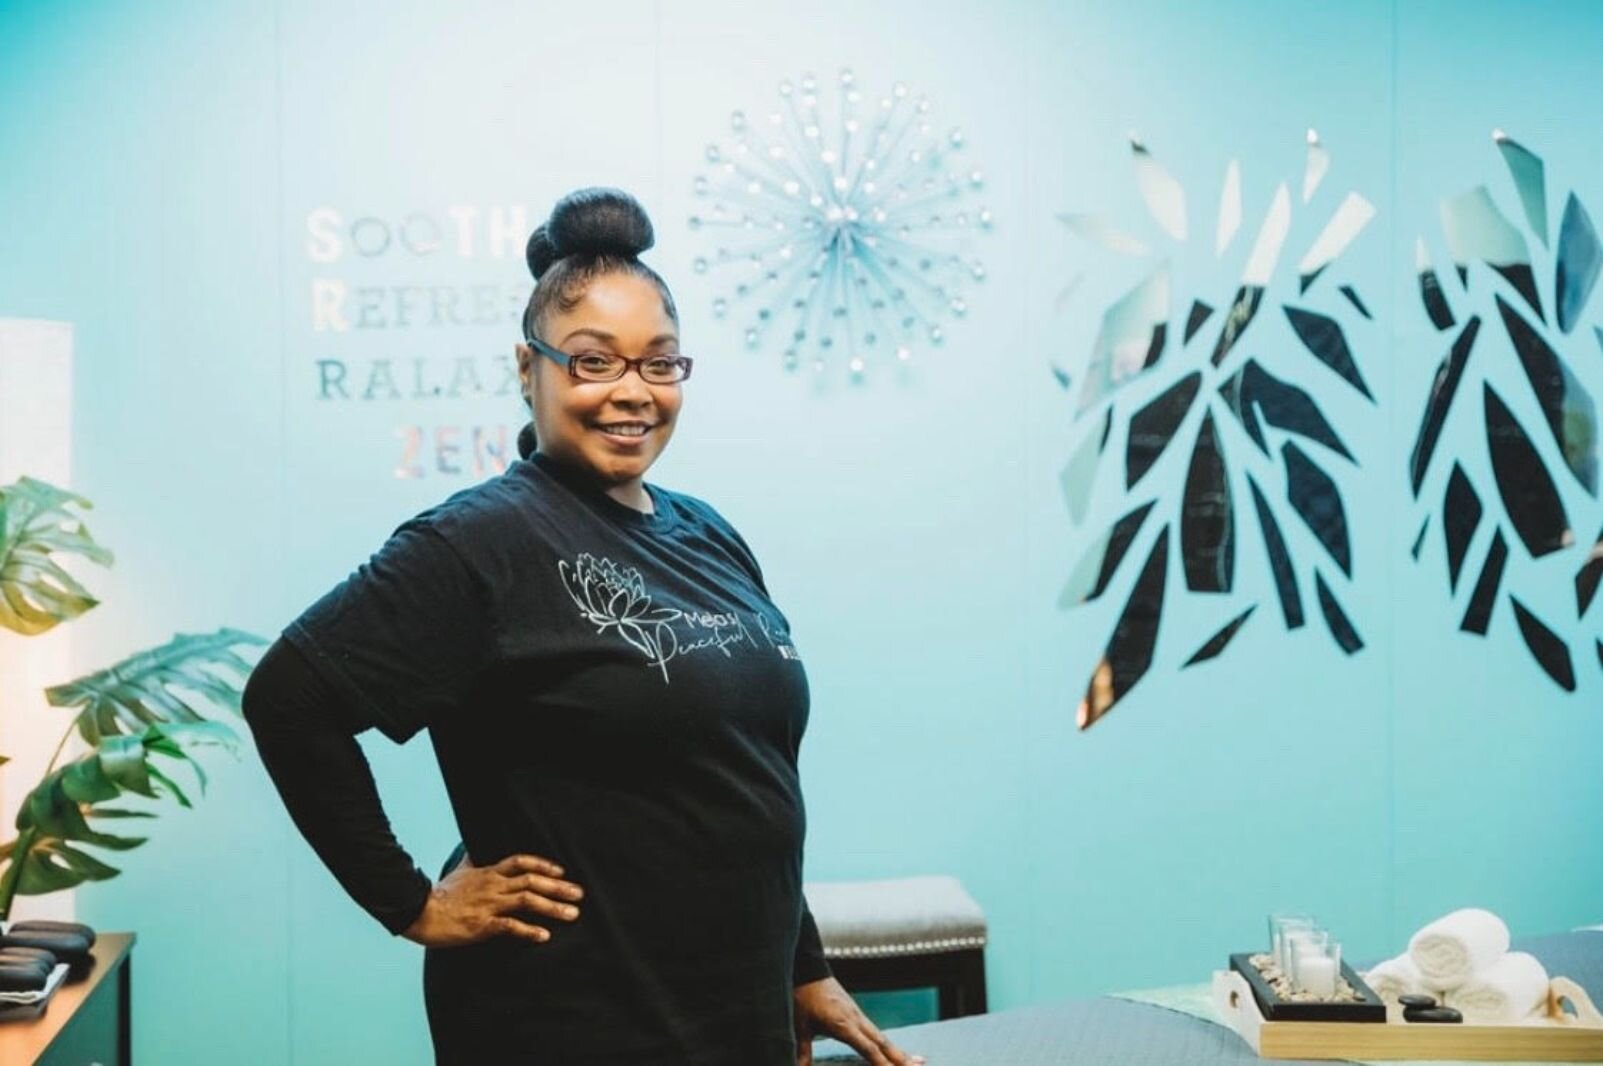 Jamila Mullen says, an "important motivation for starting my business was to provide healing therapy for the black community who suffer from underlying illnesses, various health conditions & carry heavy levels of stress & pain."